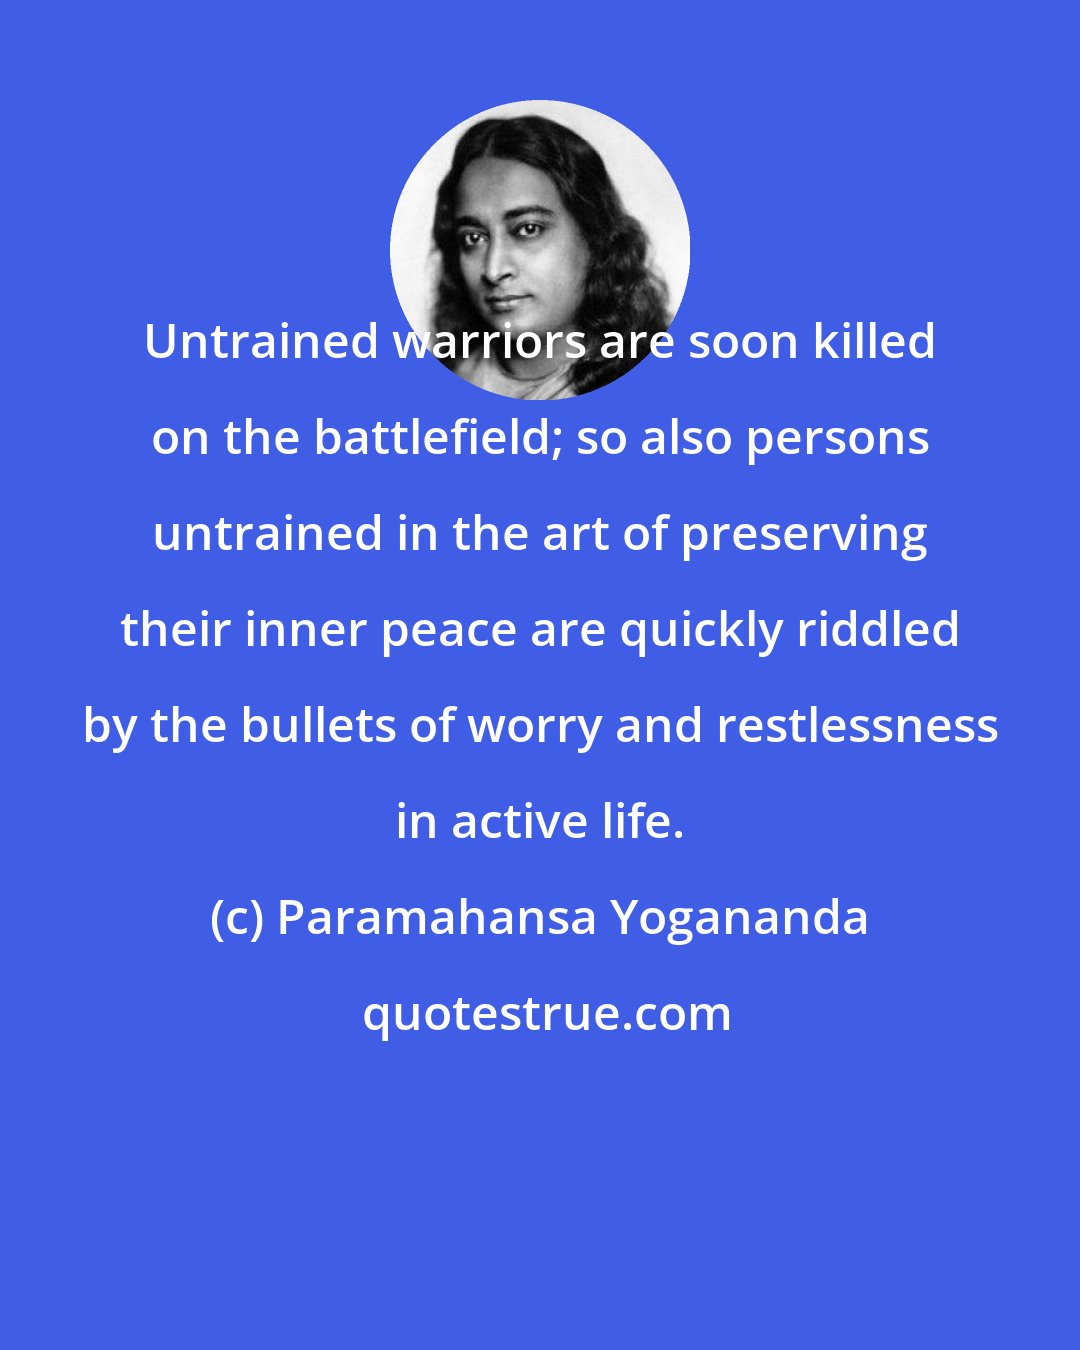 Paramahansa Yogananda: Untrained warriors are soon killed on the battlefield; so also persons untrained in the art of preserving their inner peace are quickly riddled by the bullets of worry and restlessness in active life.